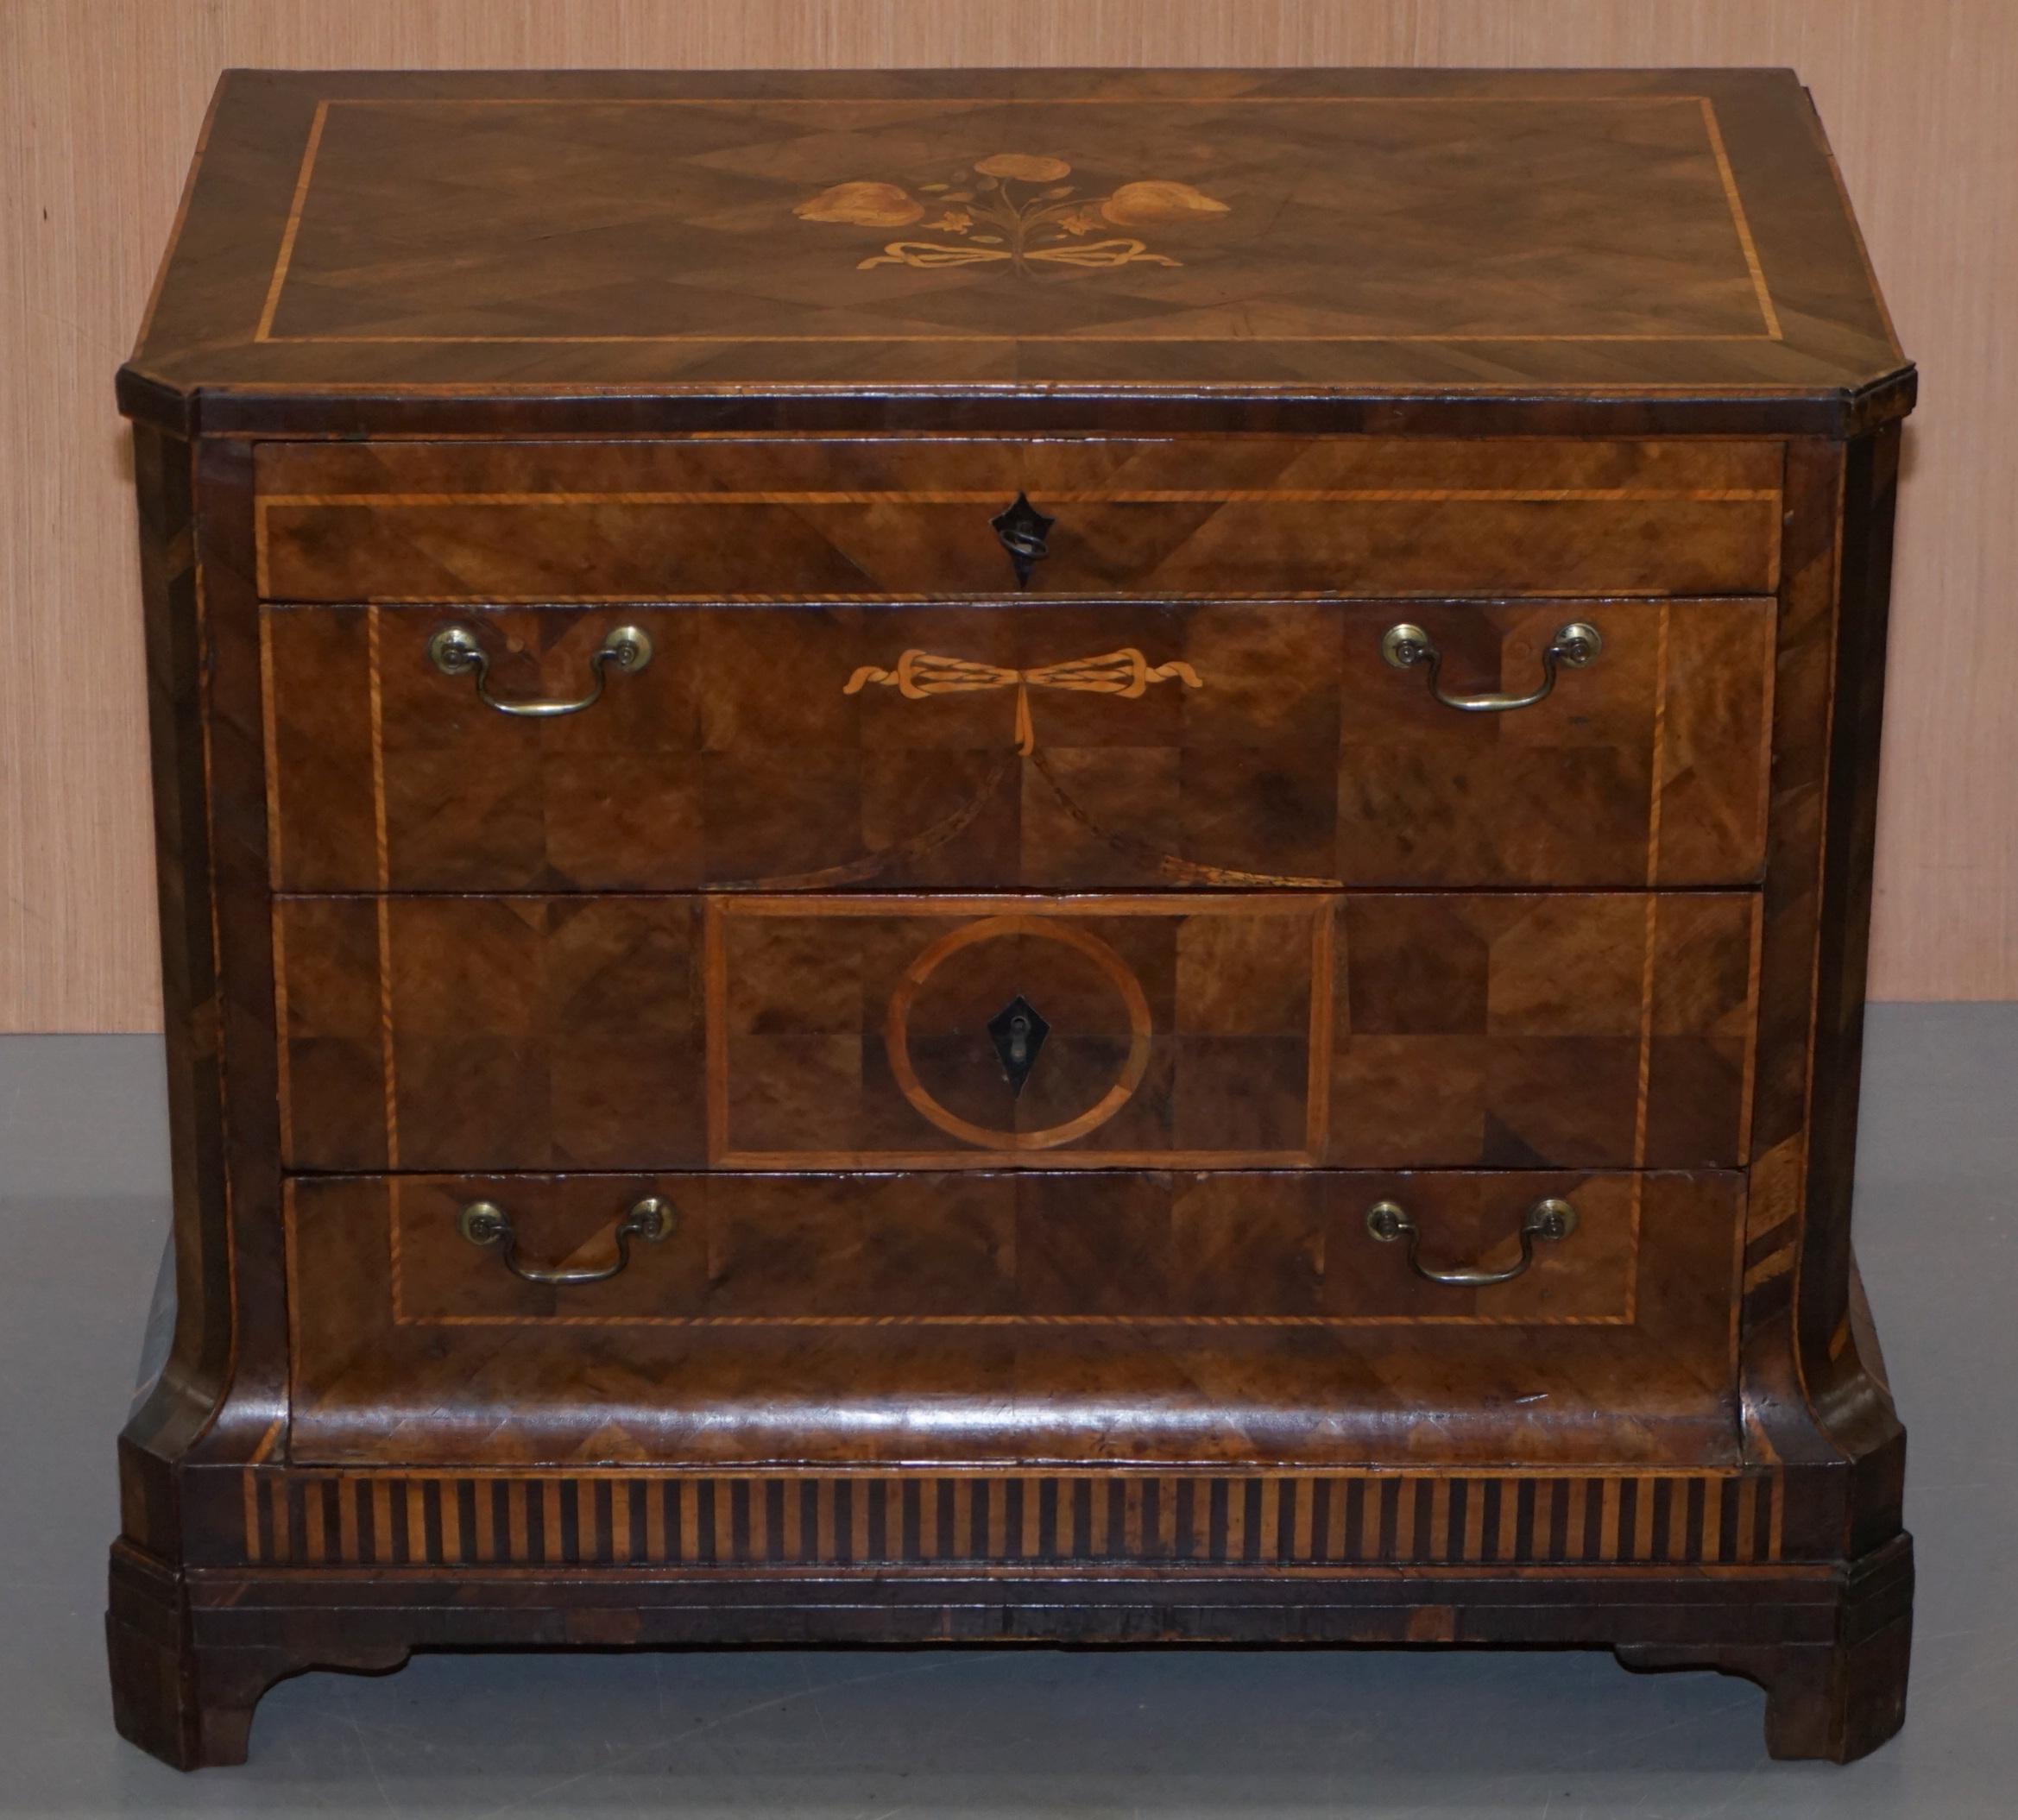 English Rare circa 1780 Continental Parquetry Marquetry Inlaid Commode Chest of Drawers For Sale